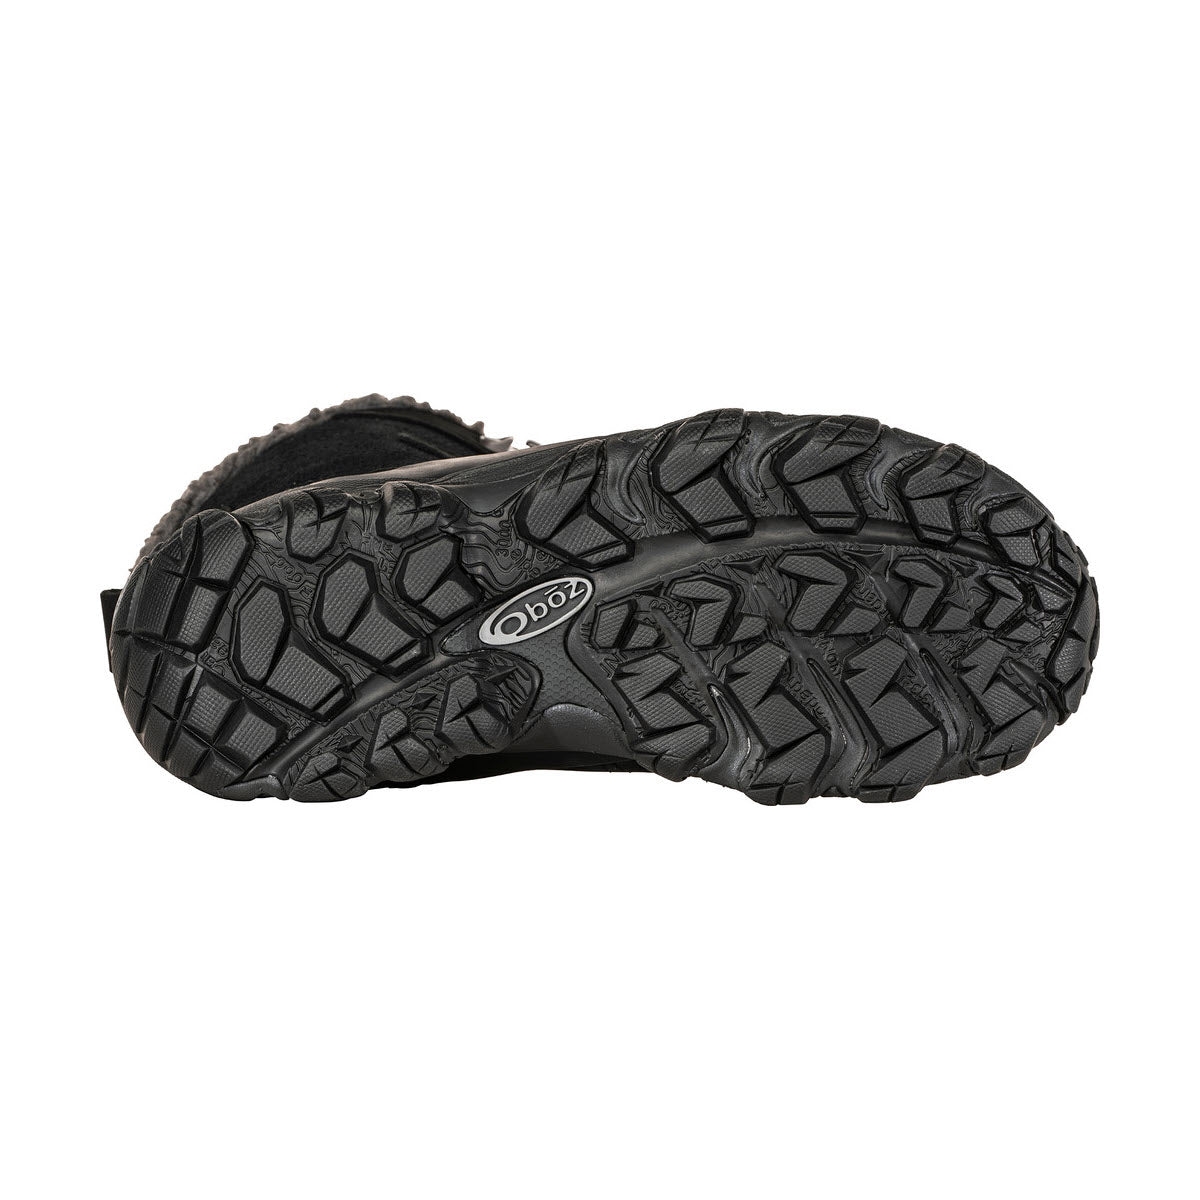 Black hiking shoe sole with a complex tread pattern and visible Oboz logo, designed for women&#39;s OBOZ BRIDGER 9&quot; INSULATED B-DRY BLACK SEA boots.